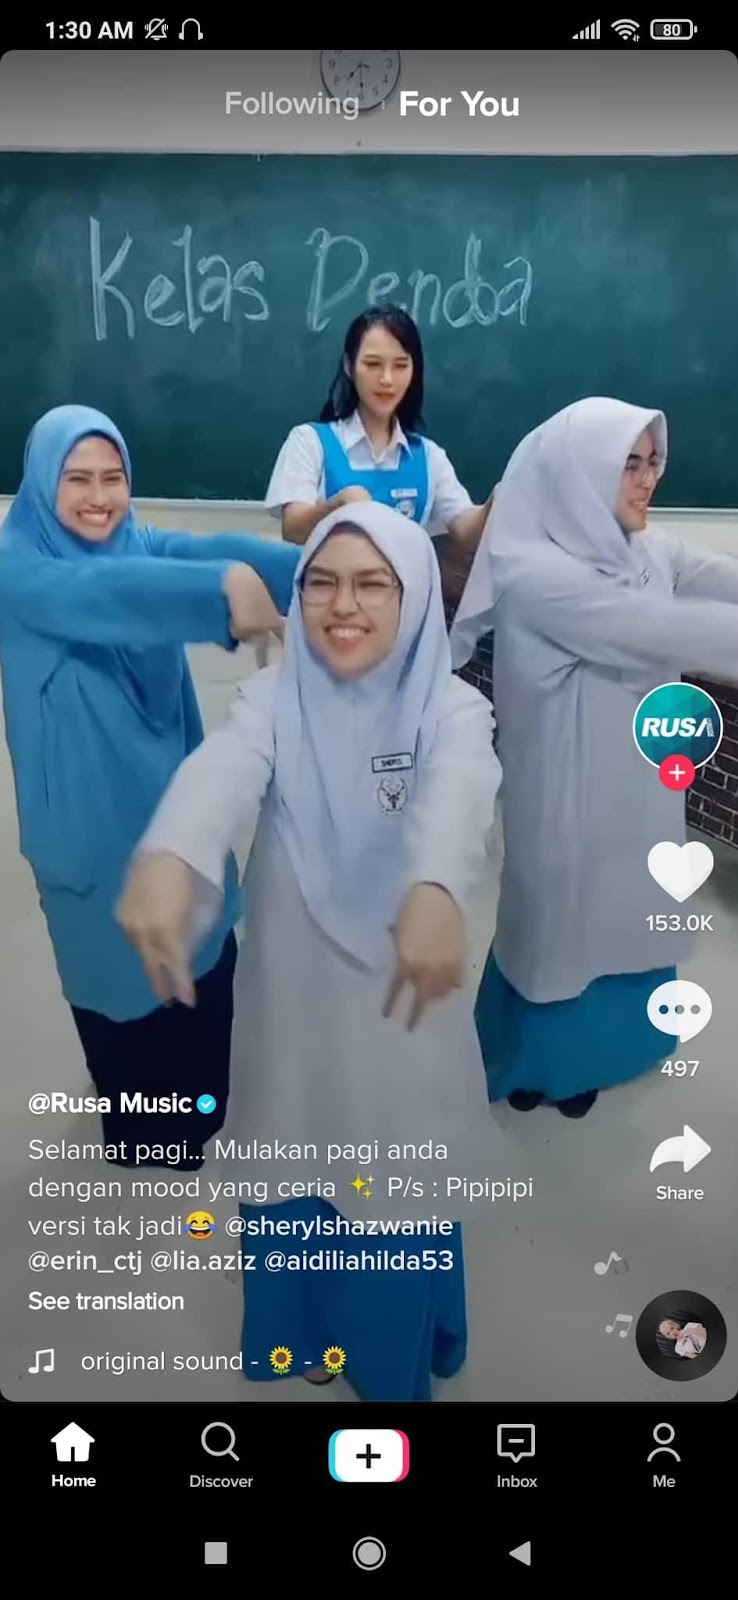 Best Time To Post On Tik Tok Malaysia - One Search Pro